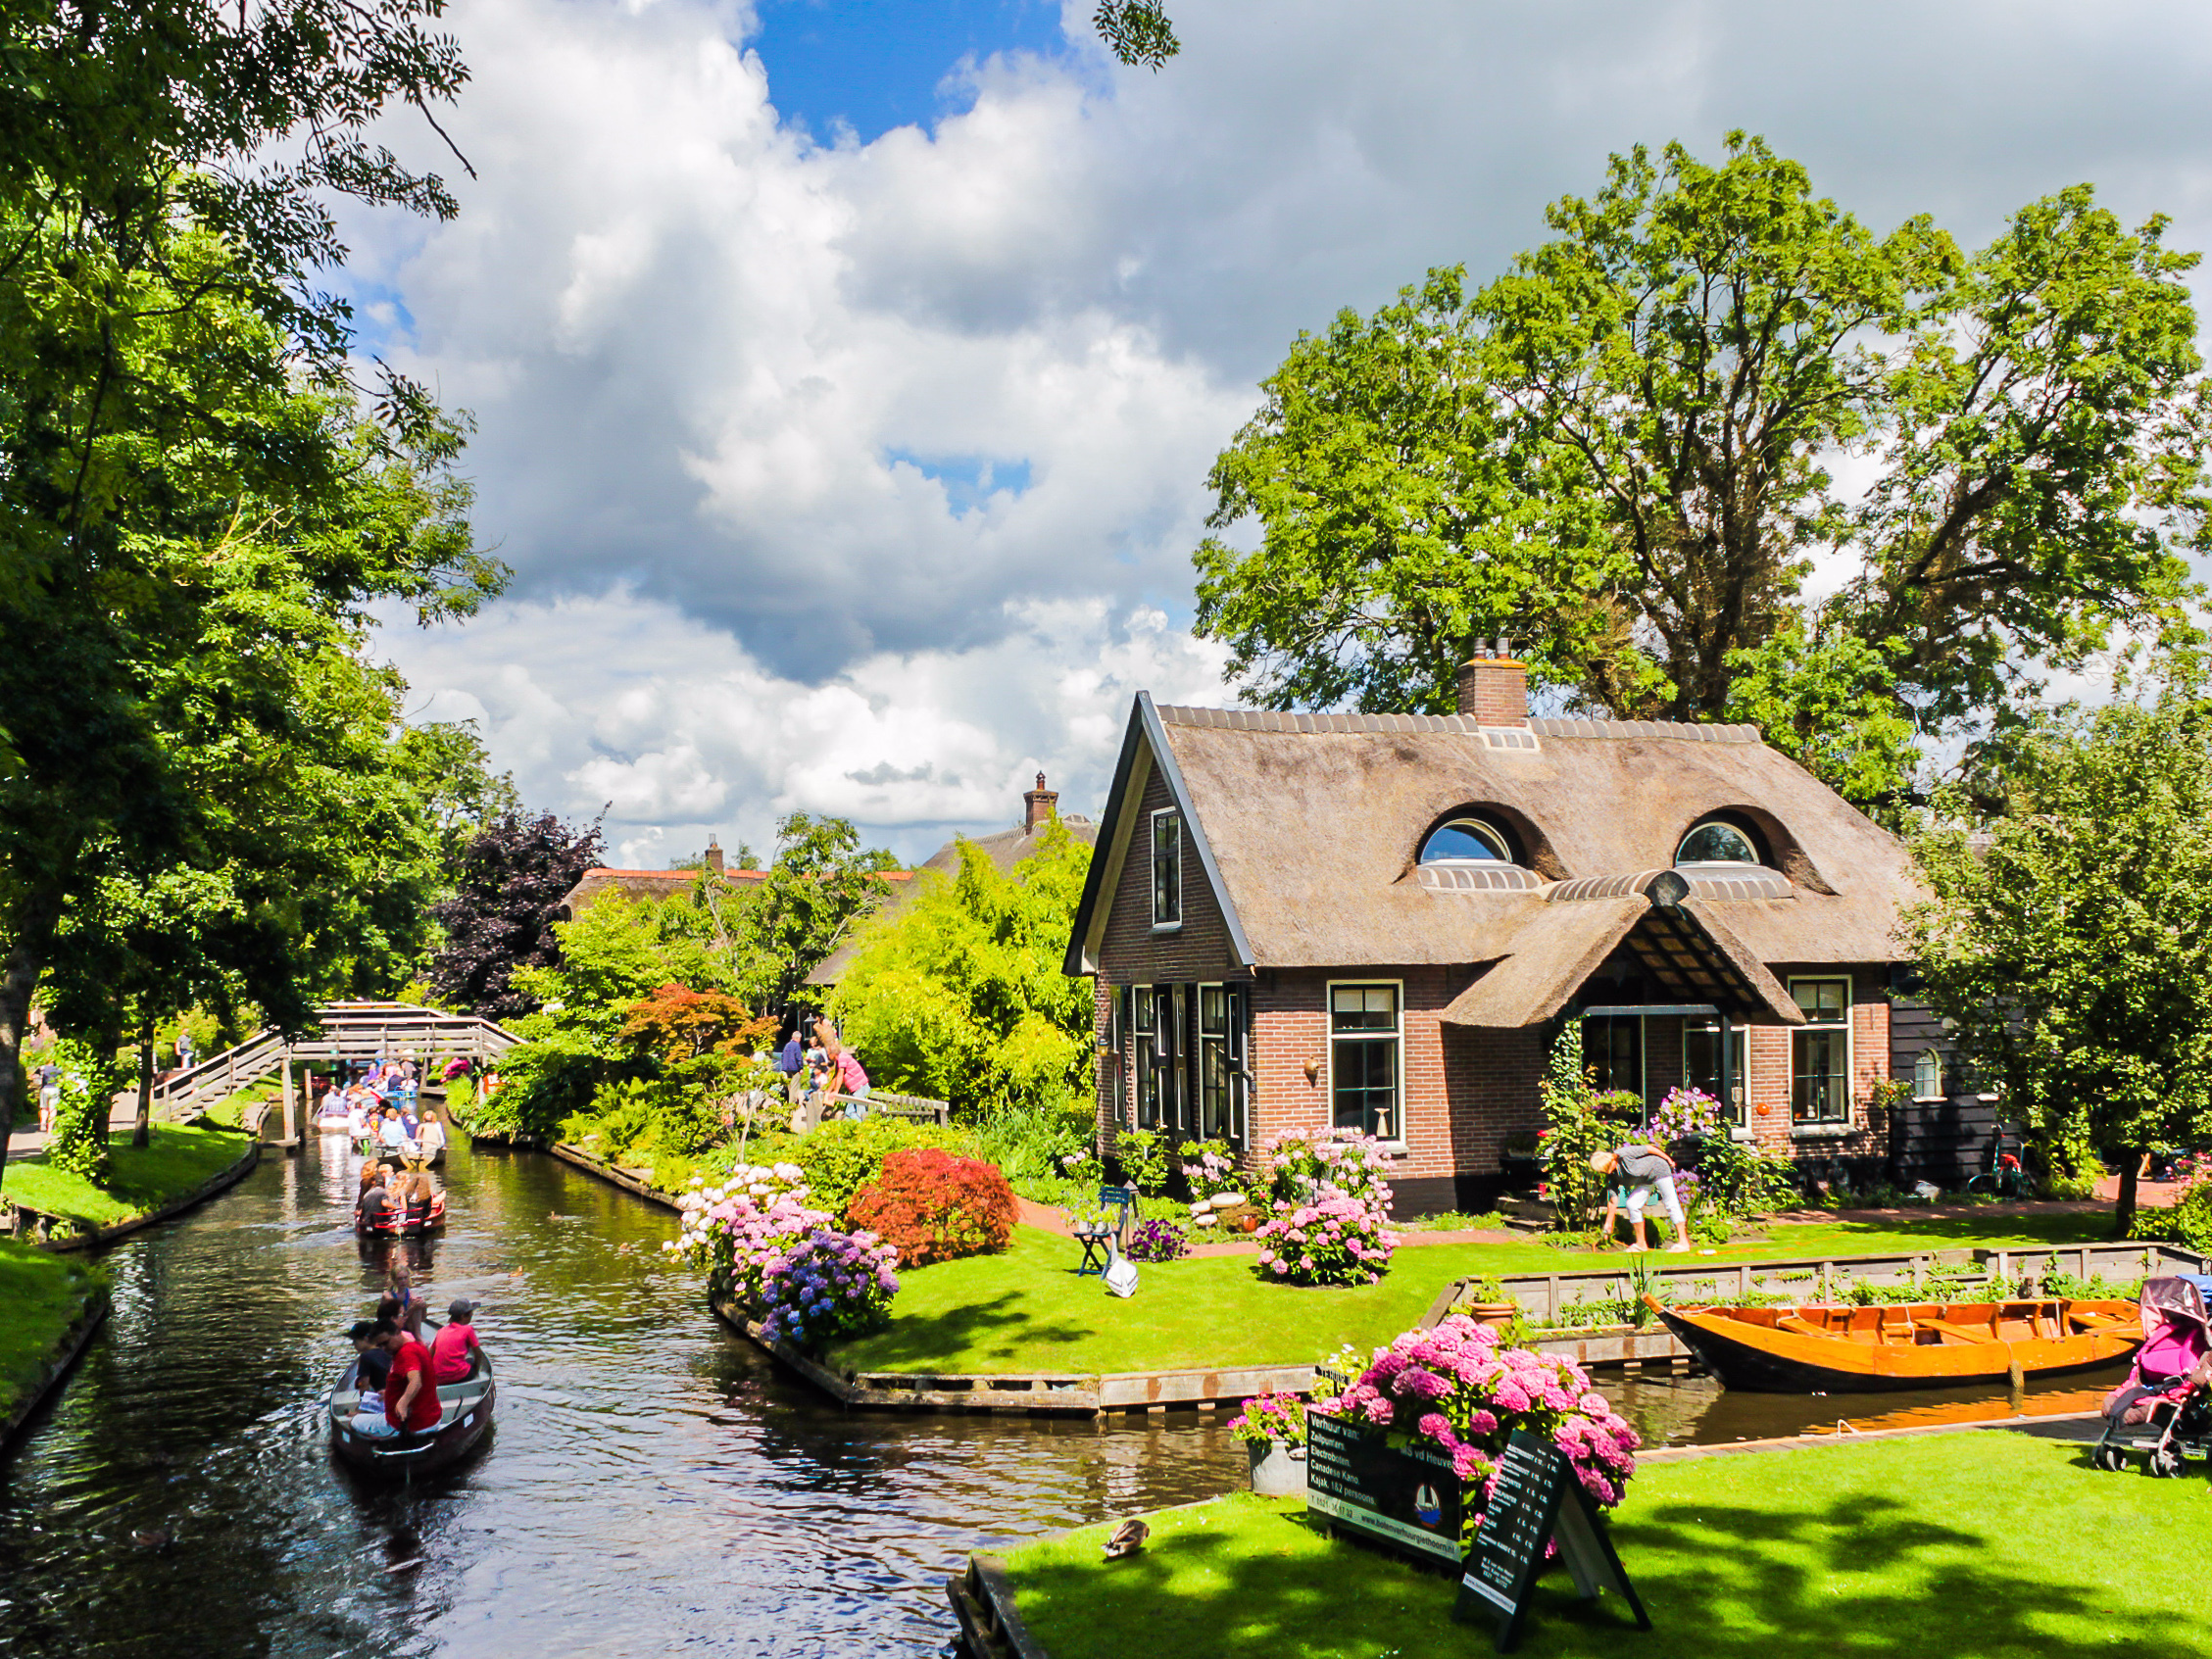 19 charming small villages you've probably never heard of but should ...